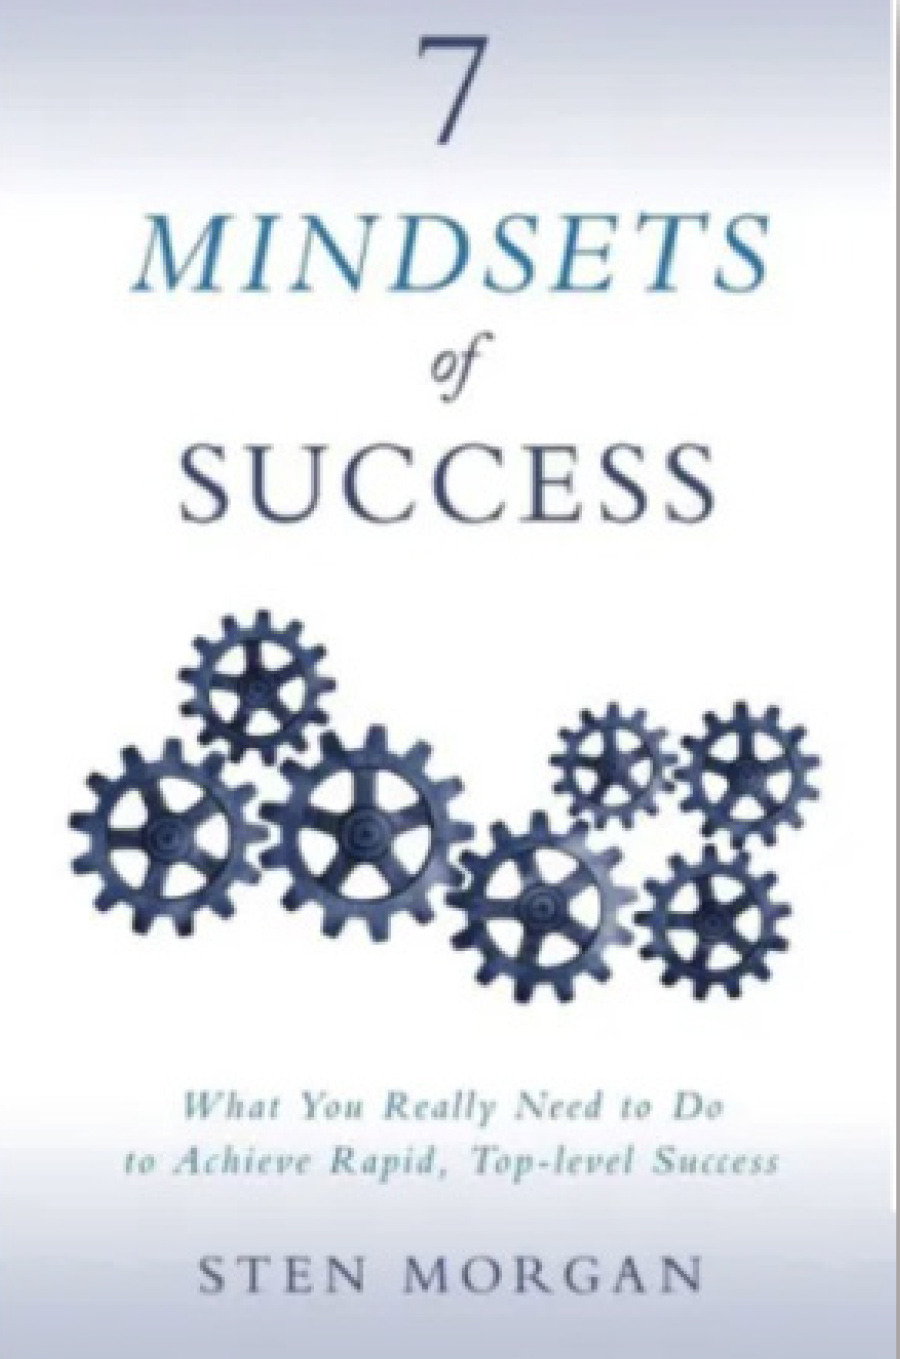 Mindset of success book cover